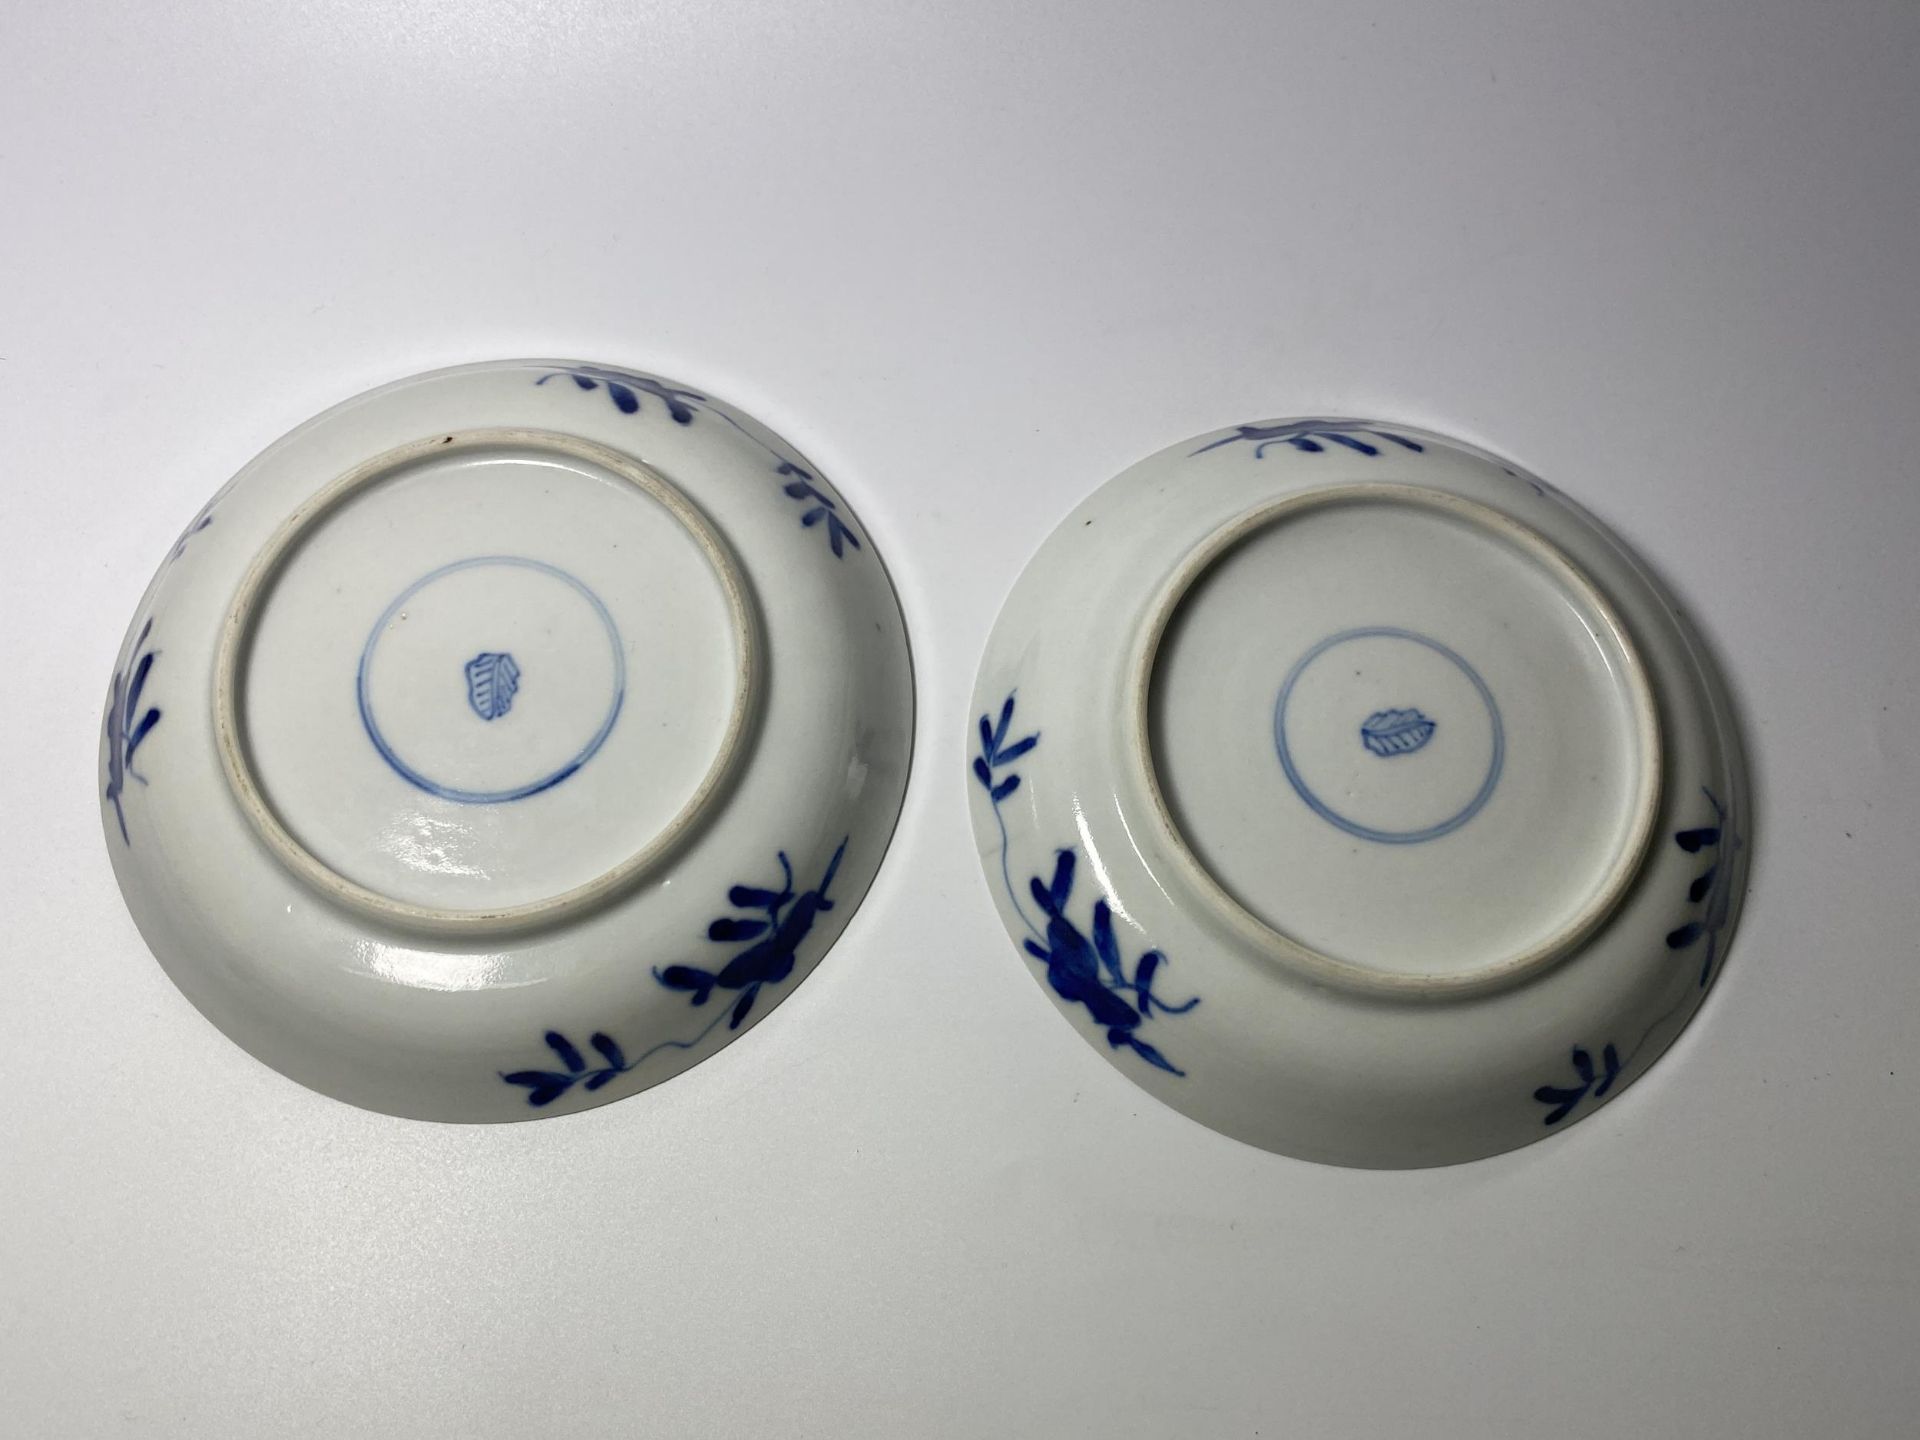 A PAIR OF KANGXI PERIOD (1661-1722) CHINESE BLUE AND WHITE PORCELAIN PLATES, ARTEMESIA LEAF MARK - Image 7 of 13